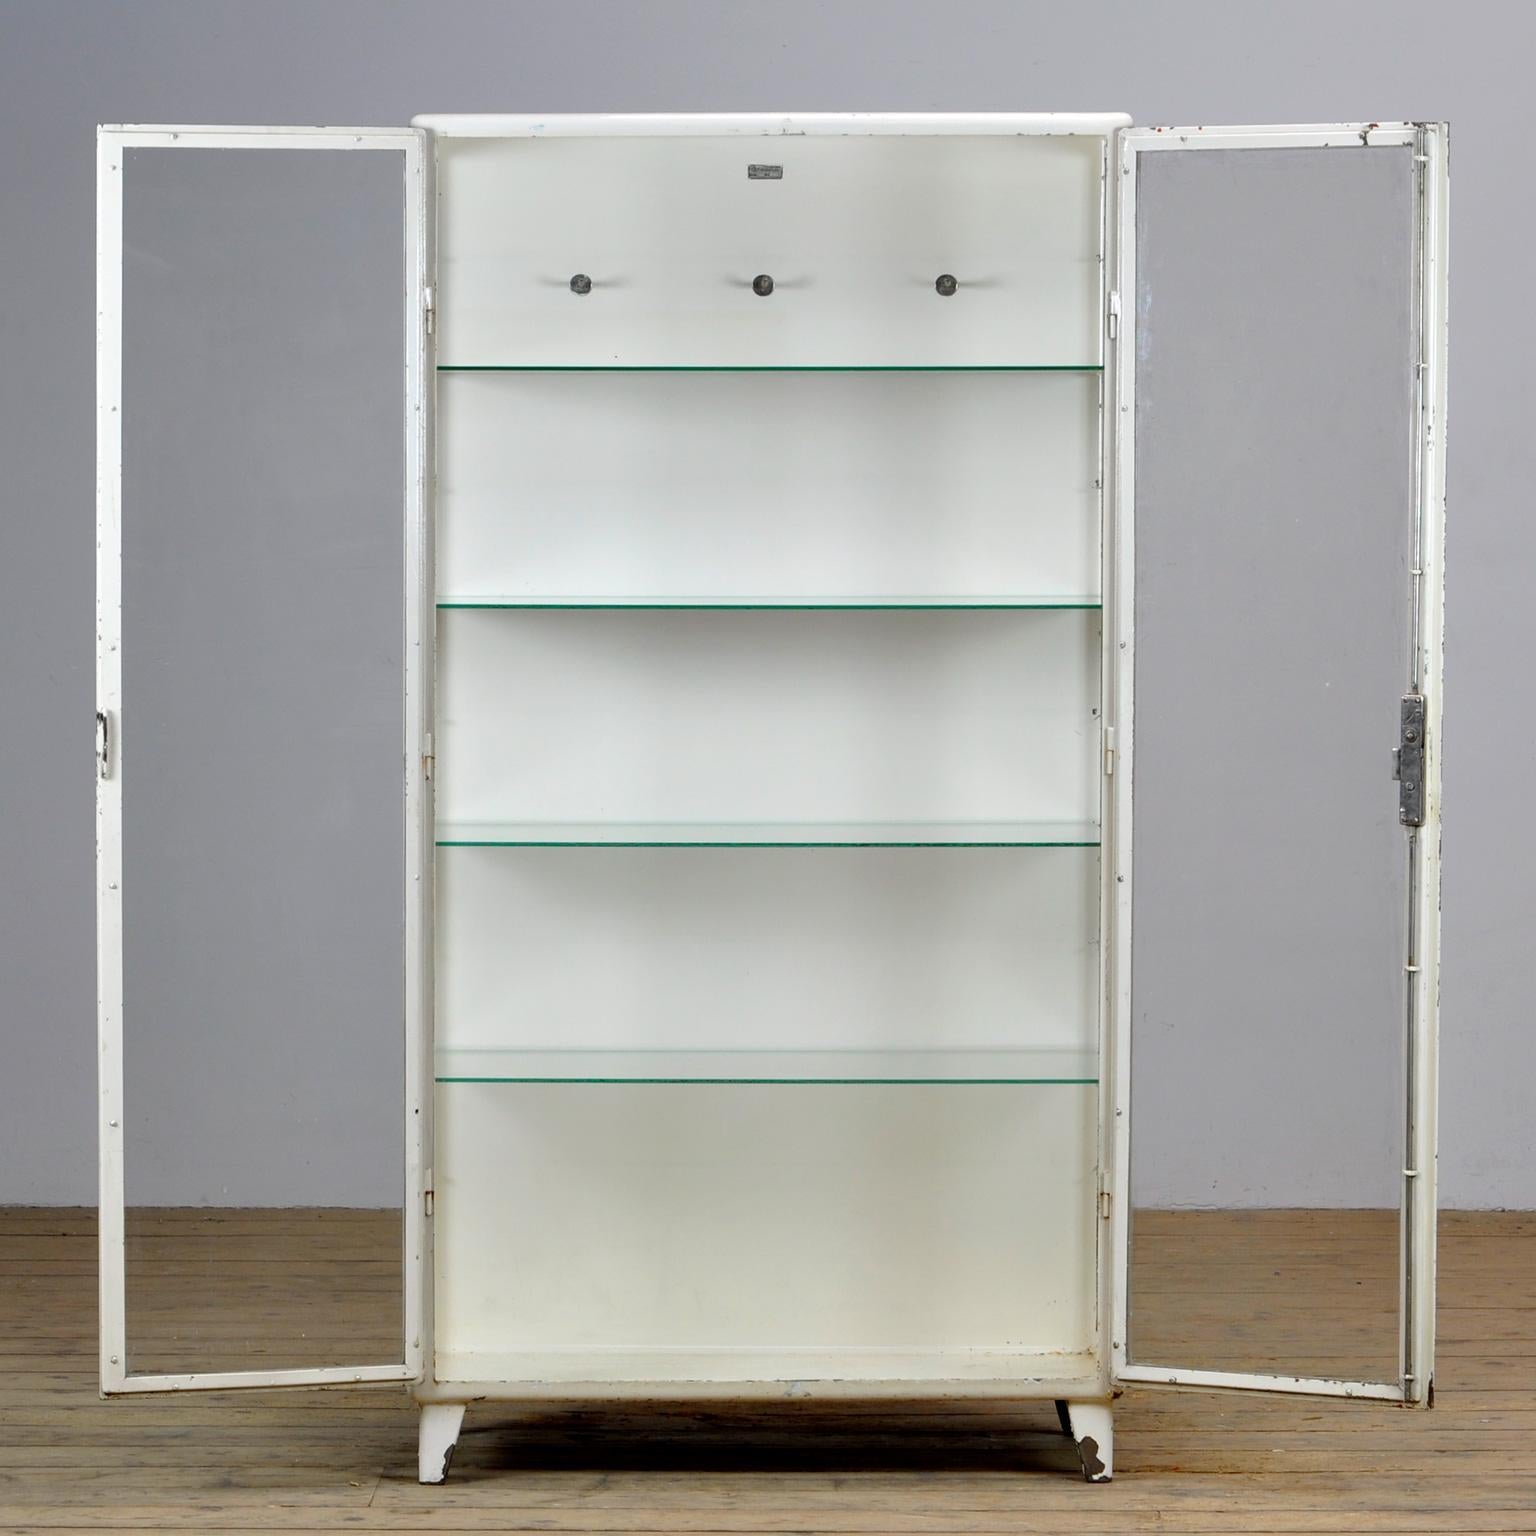 Vintage Steel And Glass Medical Cabinet, 1960s In Good Condition For Sale In Amsterdam, Noord Holland